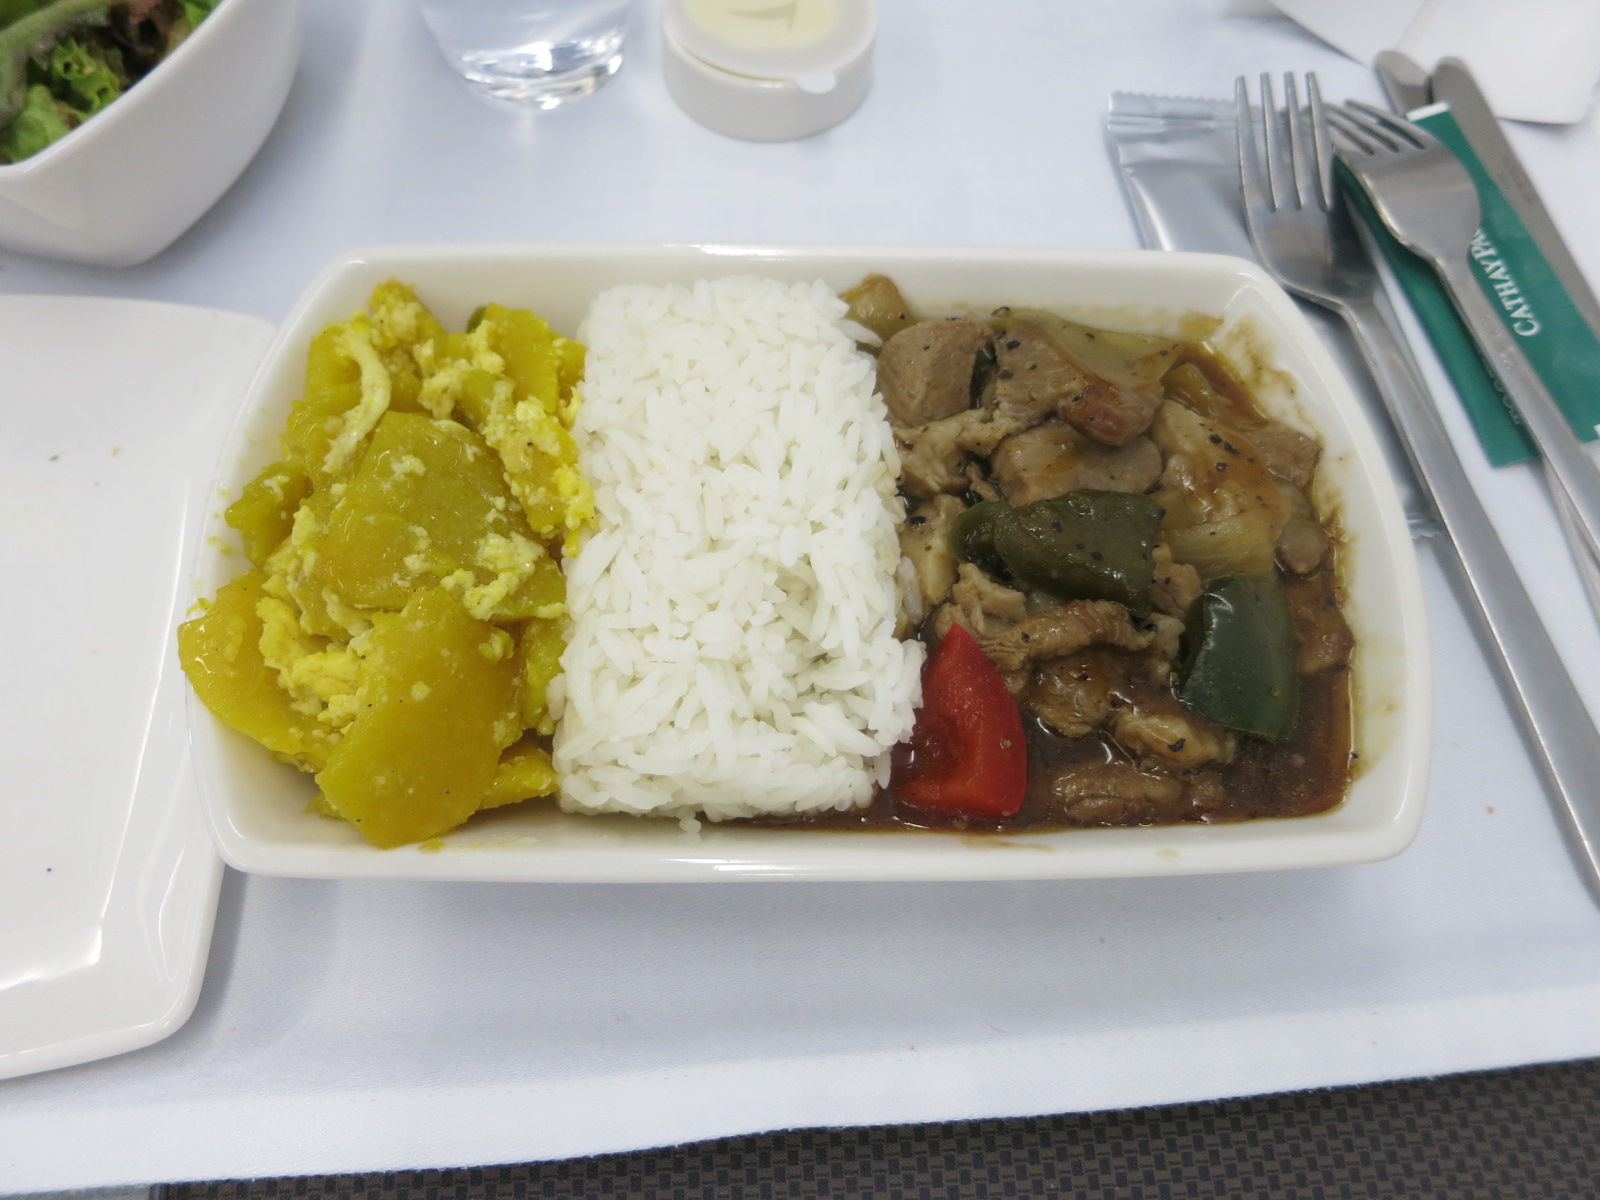 Airline Considering Making Passengers Bring Their Own Cutlery If They Want To Eat In-Flight Meals